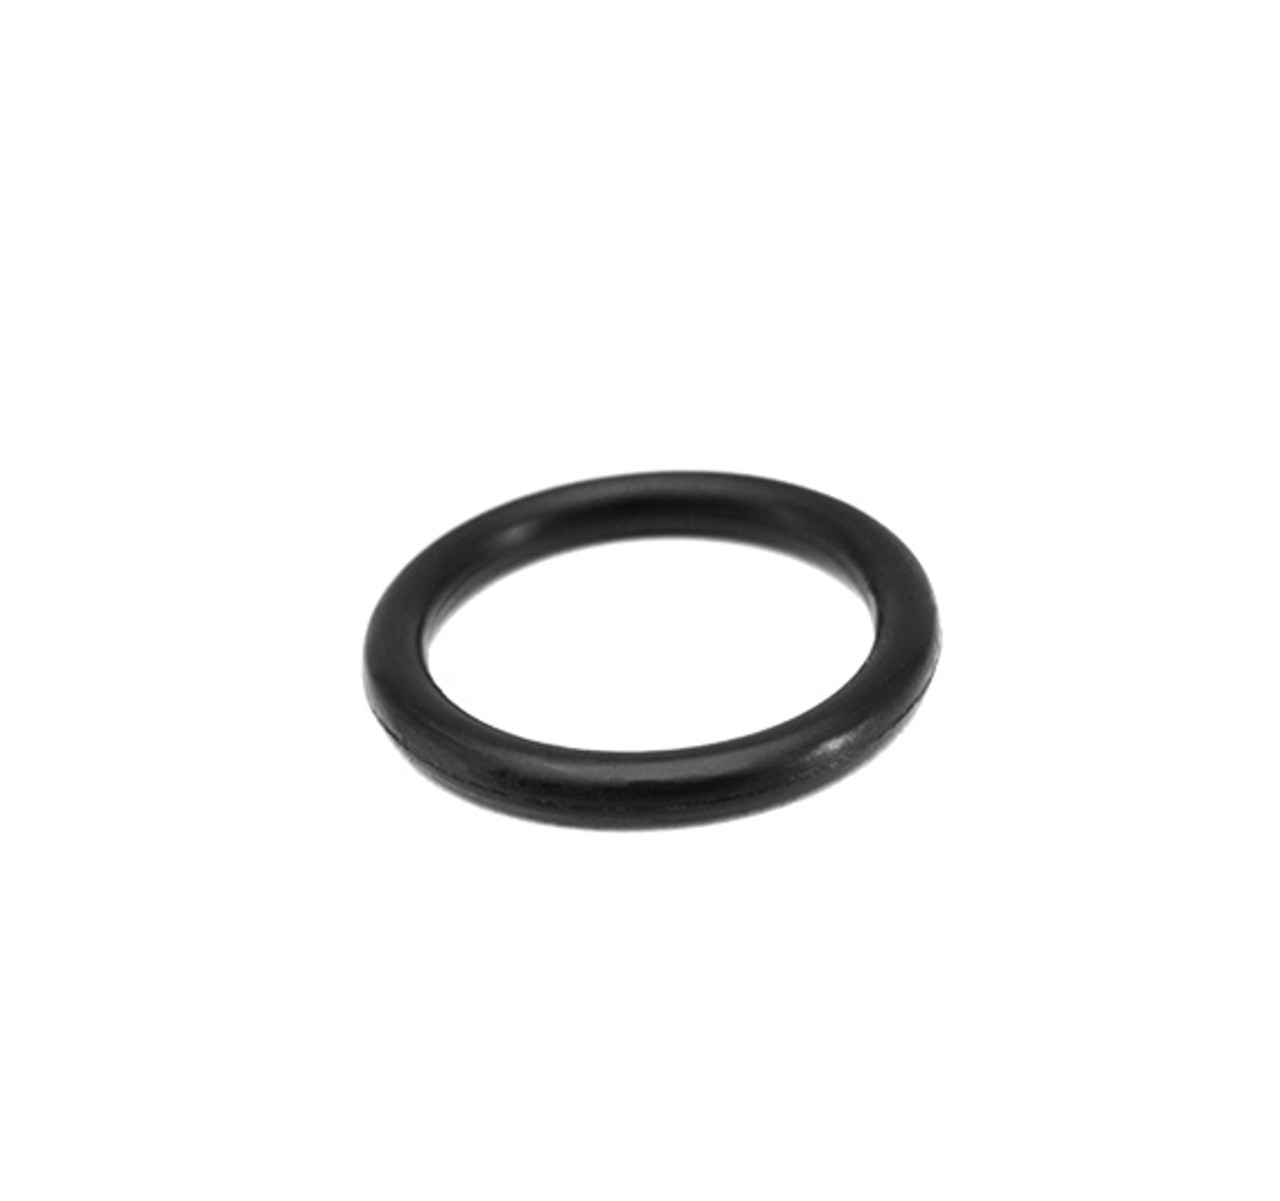 O'Ring for the UV filter quartz sleeve and UV lamp replacement